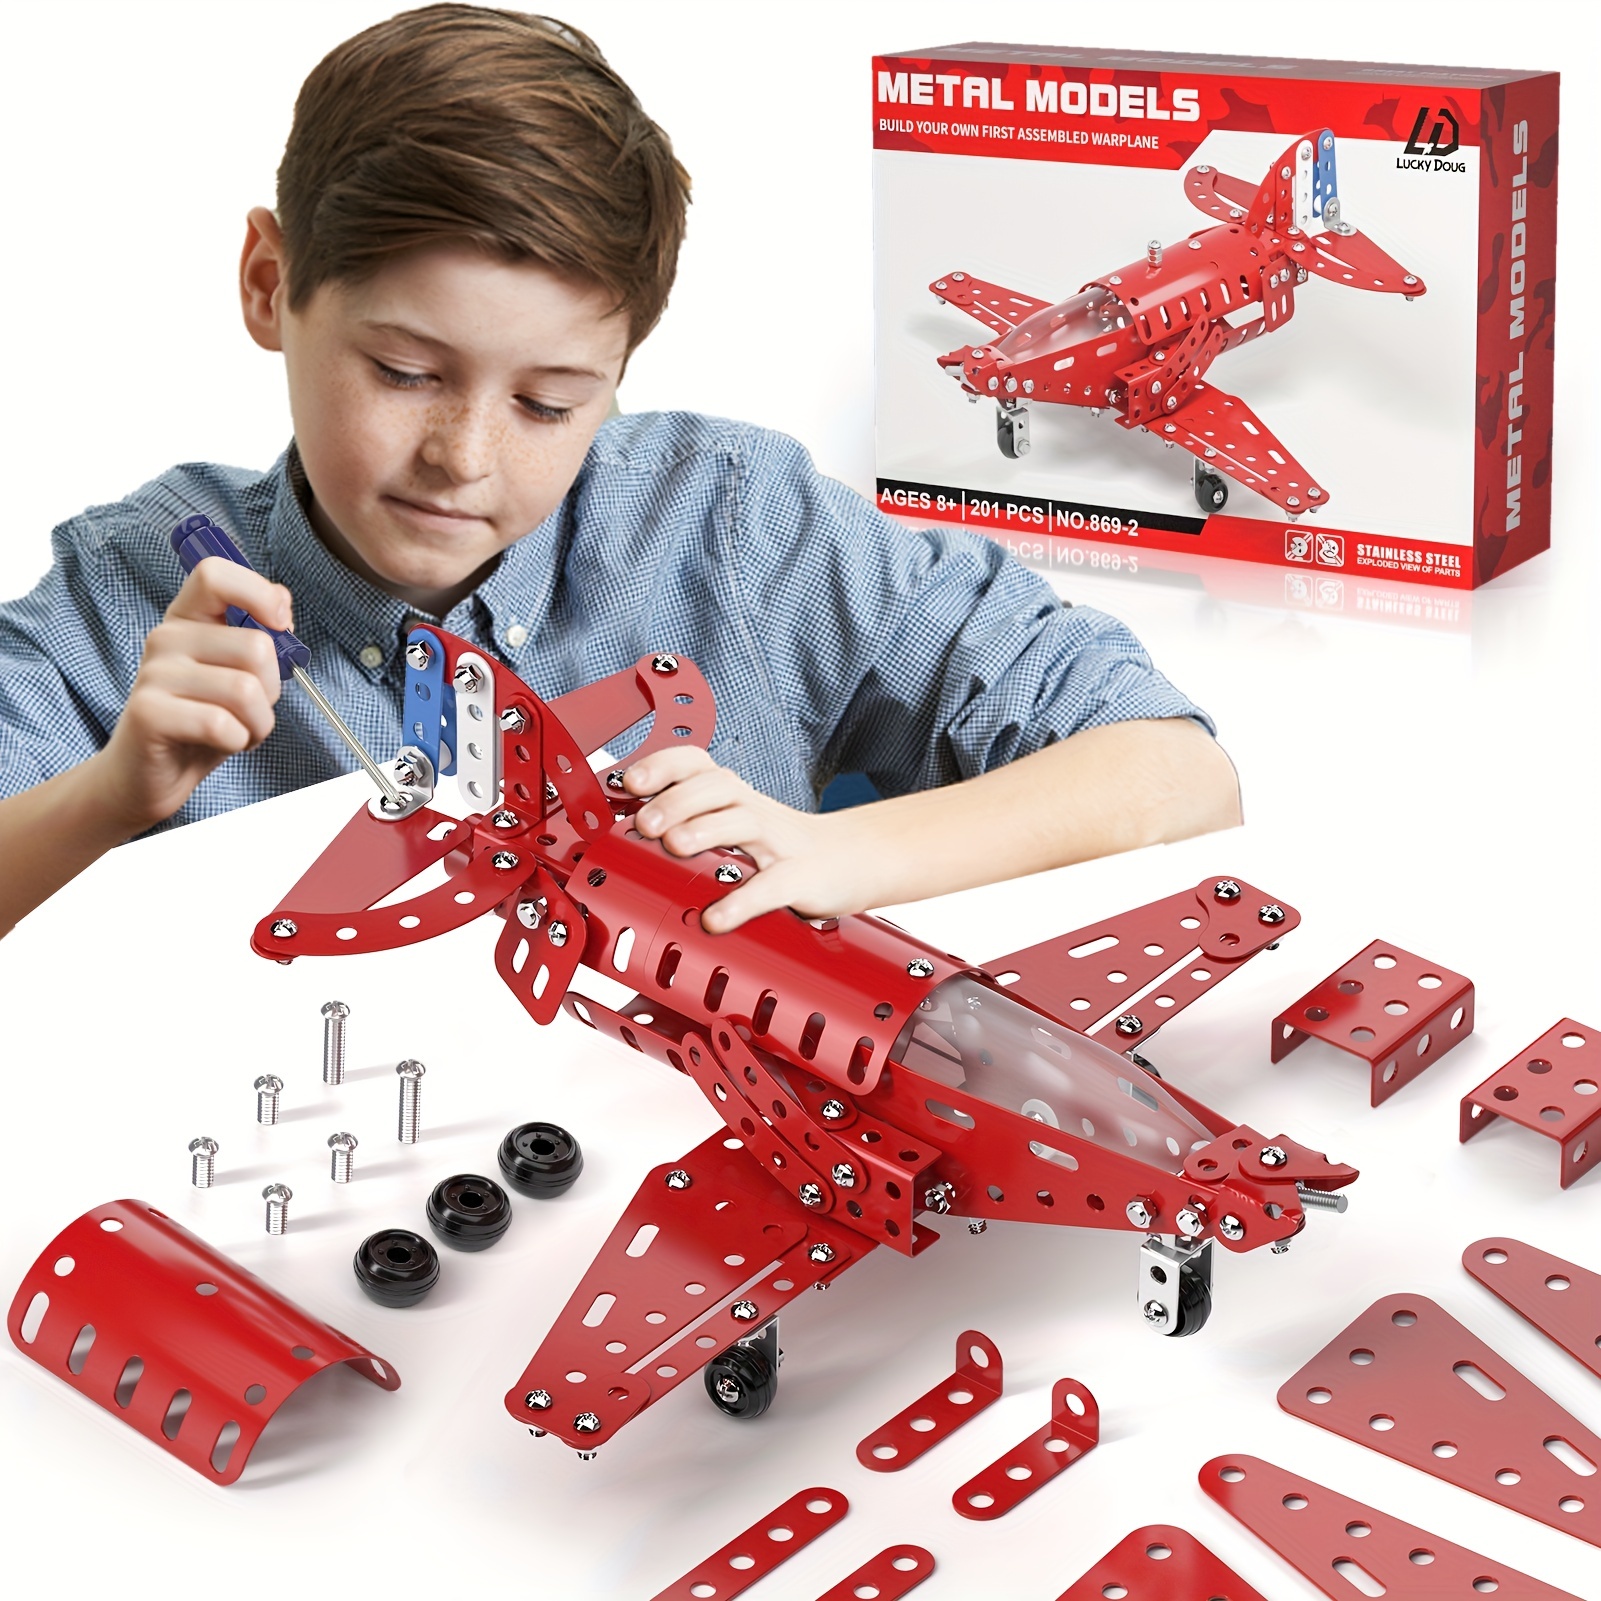 COSKEHAN Stem Assembled Model Plane Kit Building Toy, 201 Pieces Stem Projects Airplane Building Kits for Kids Age 8-12, Stem Educational Model Kit